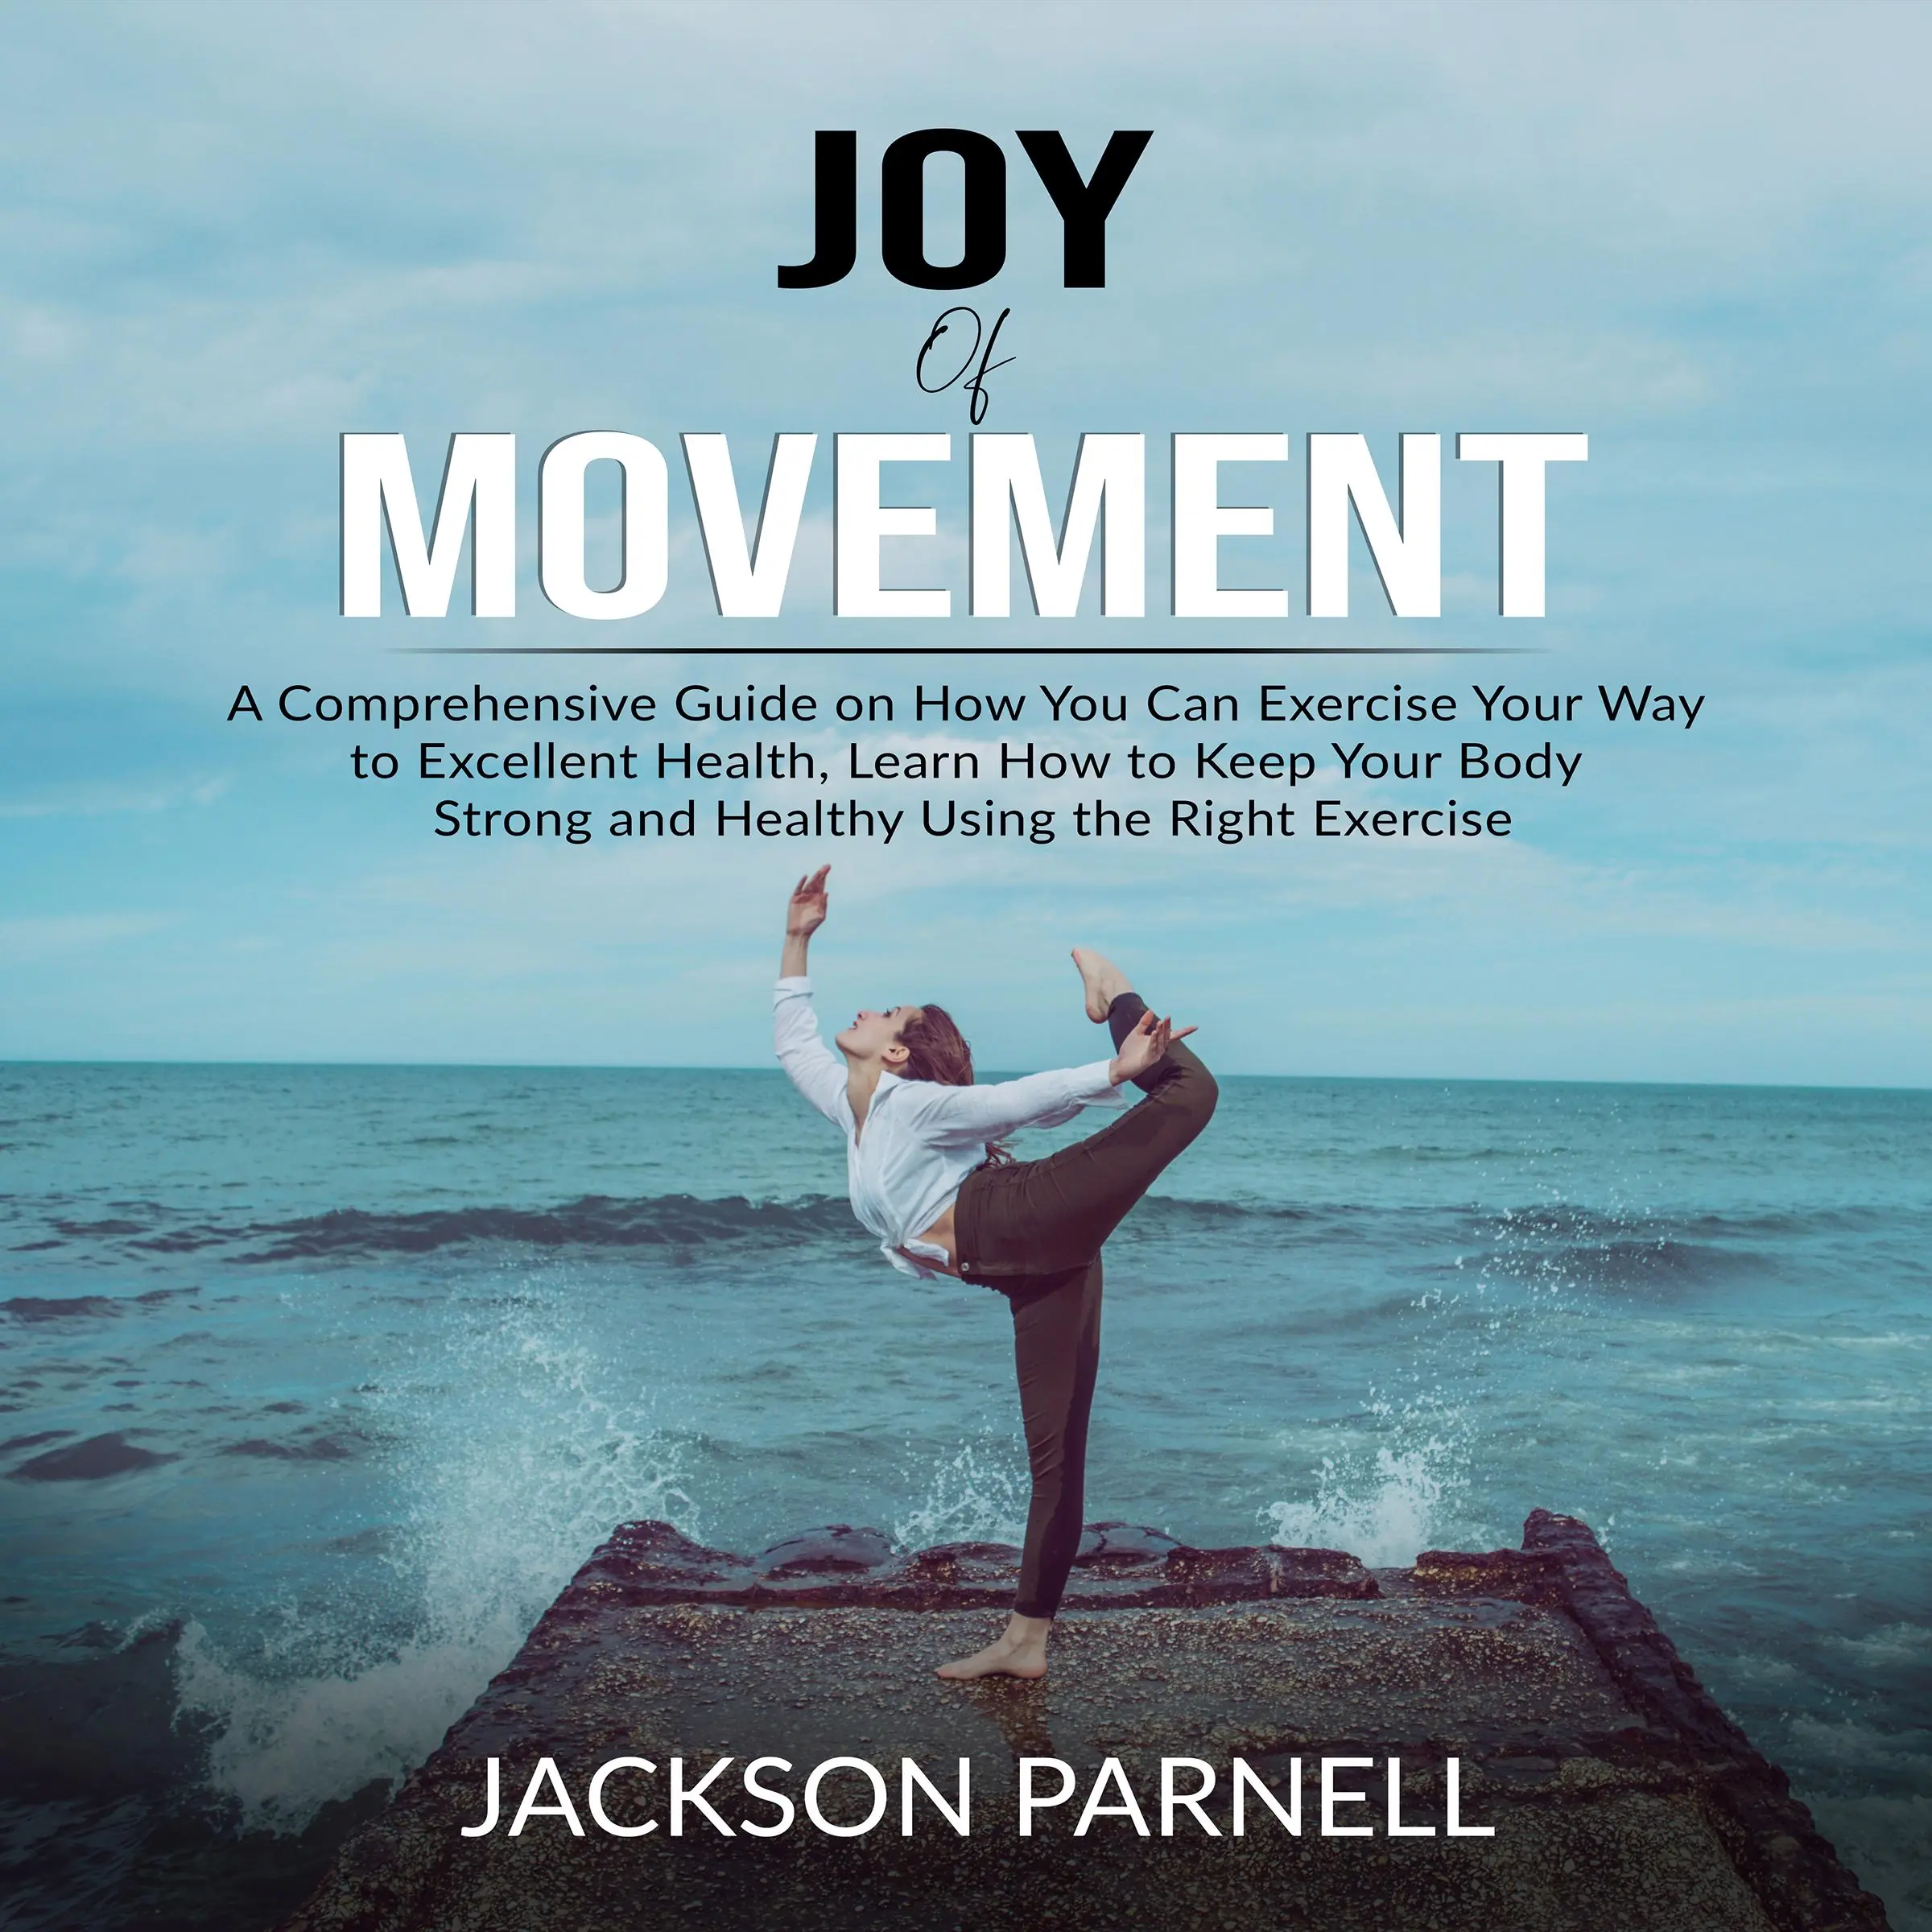 Joy of Movement: A Comprehensive Guide on How You Can Exercise Your Way to Excellent Health, Learn How to Keep Your Body Strong and Healthy Using the Right Exercise Audiobook by Jackson Parnell